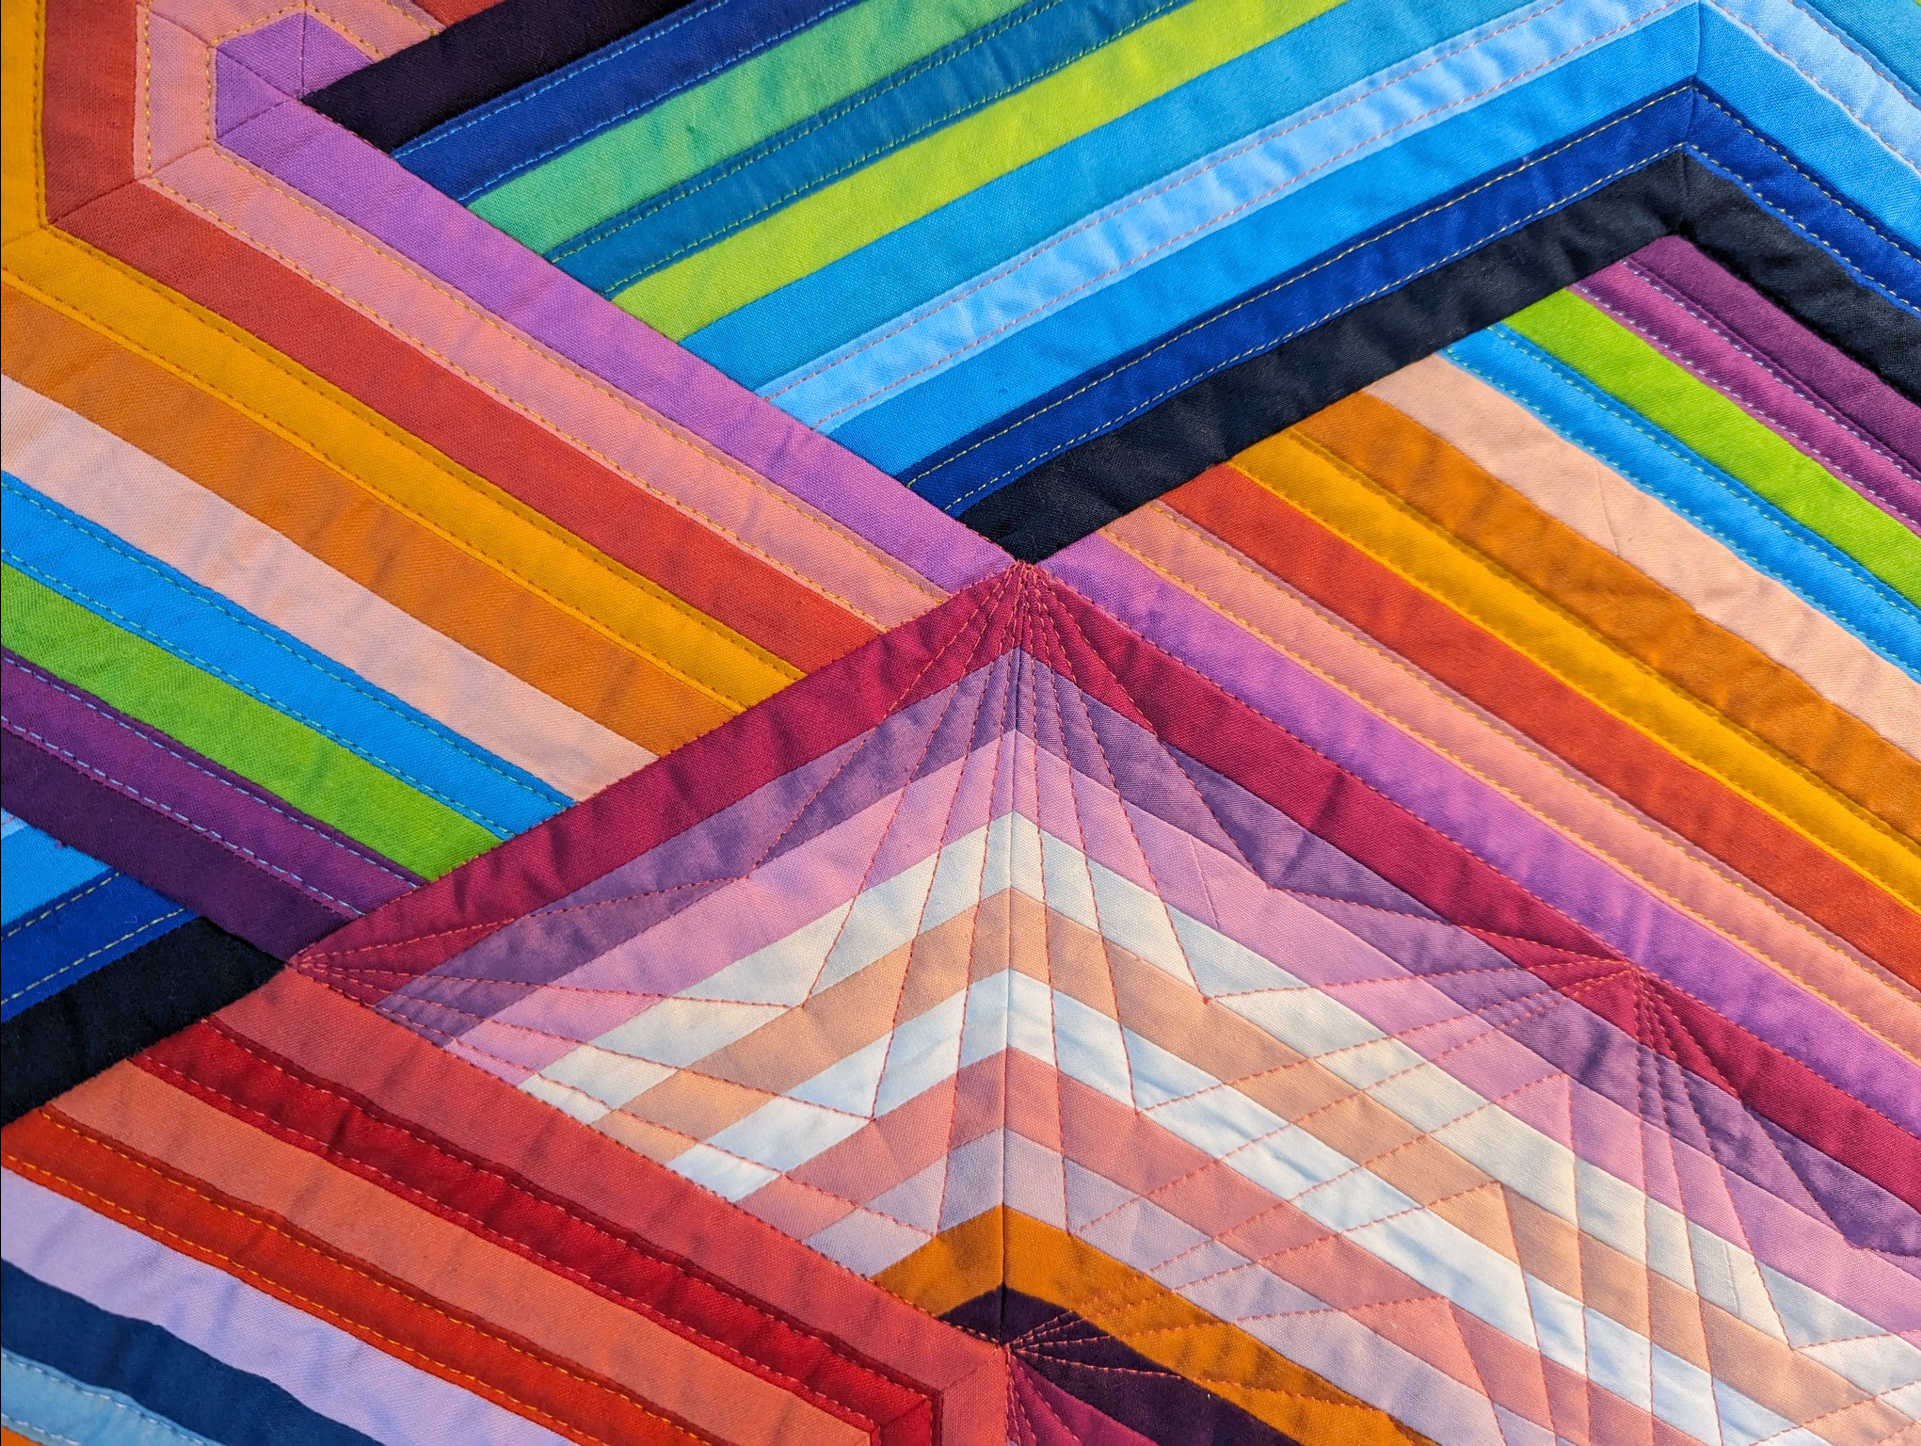 All about Interplay aka “stripey hexagon quilt”